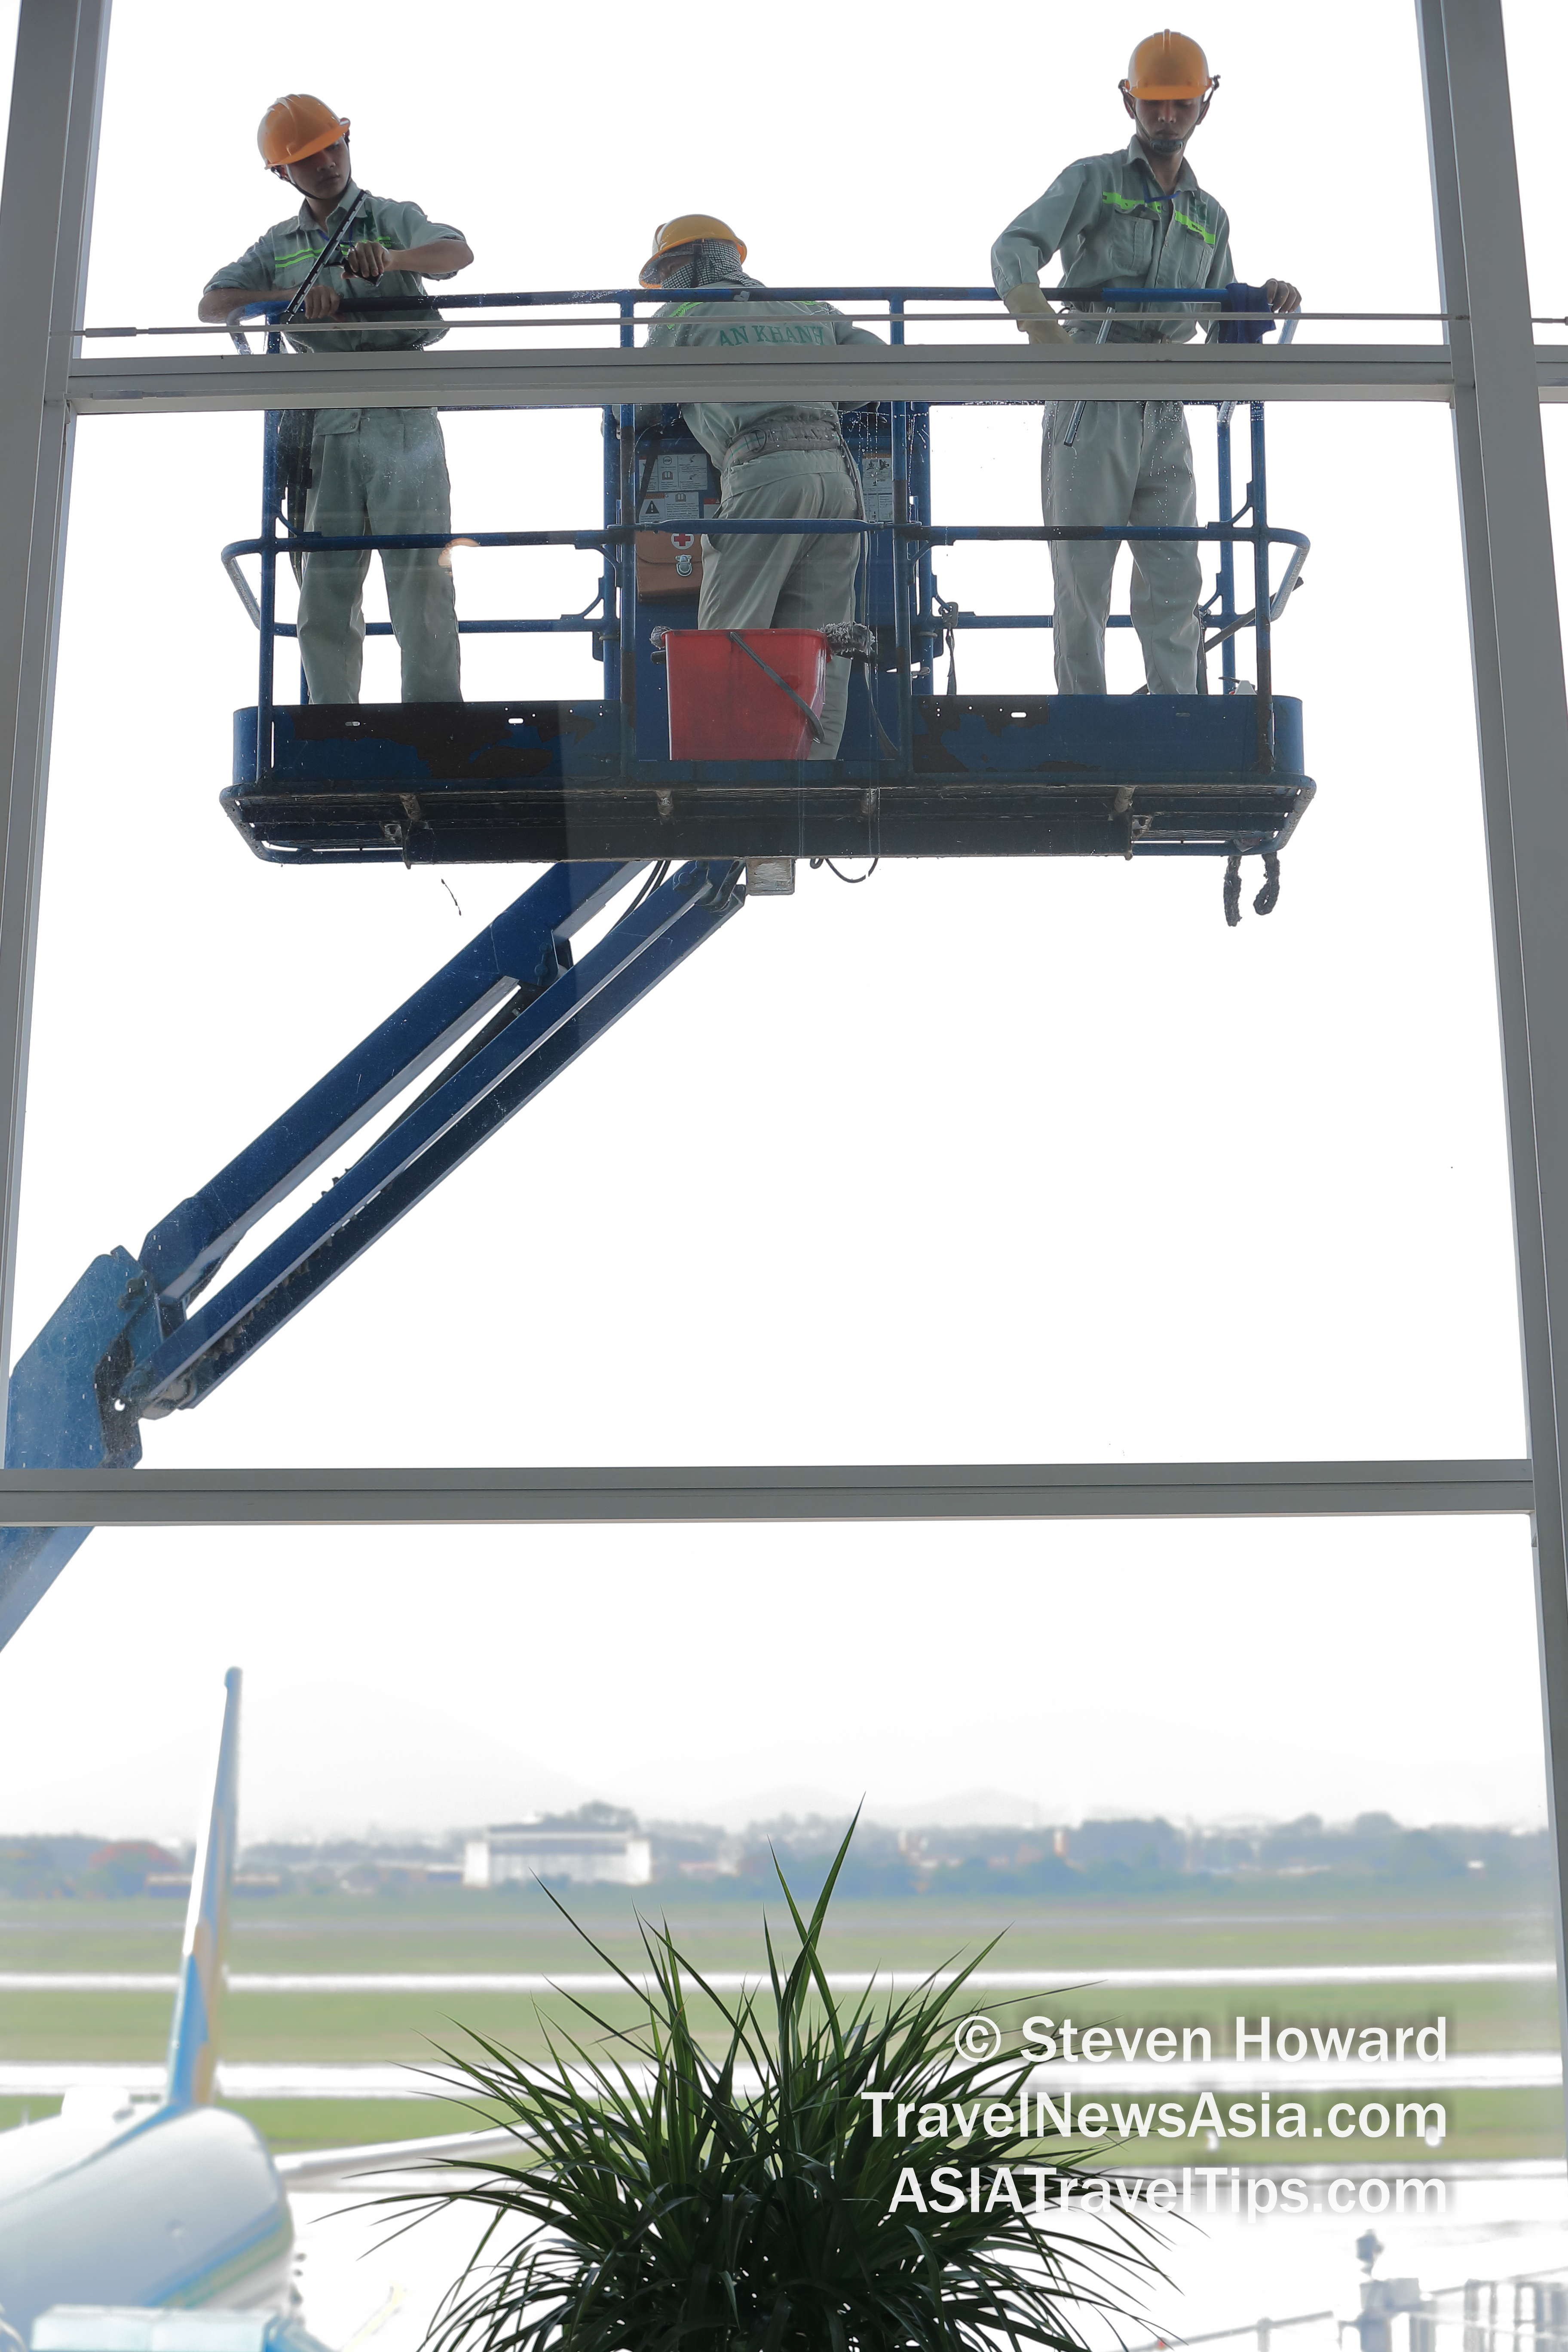 Window cleaners at Noi Bai International Airport in Hanoi, Vietnam. Picture by Steven Howard of TravelNewsAsia.com Click to enlarge.